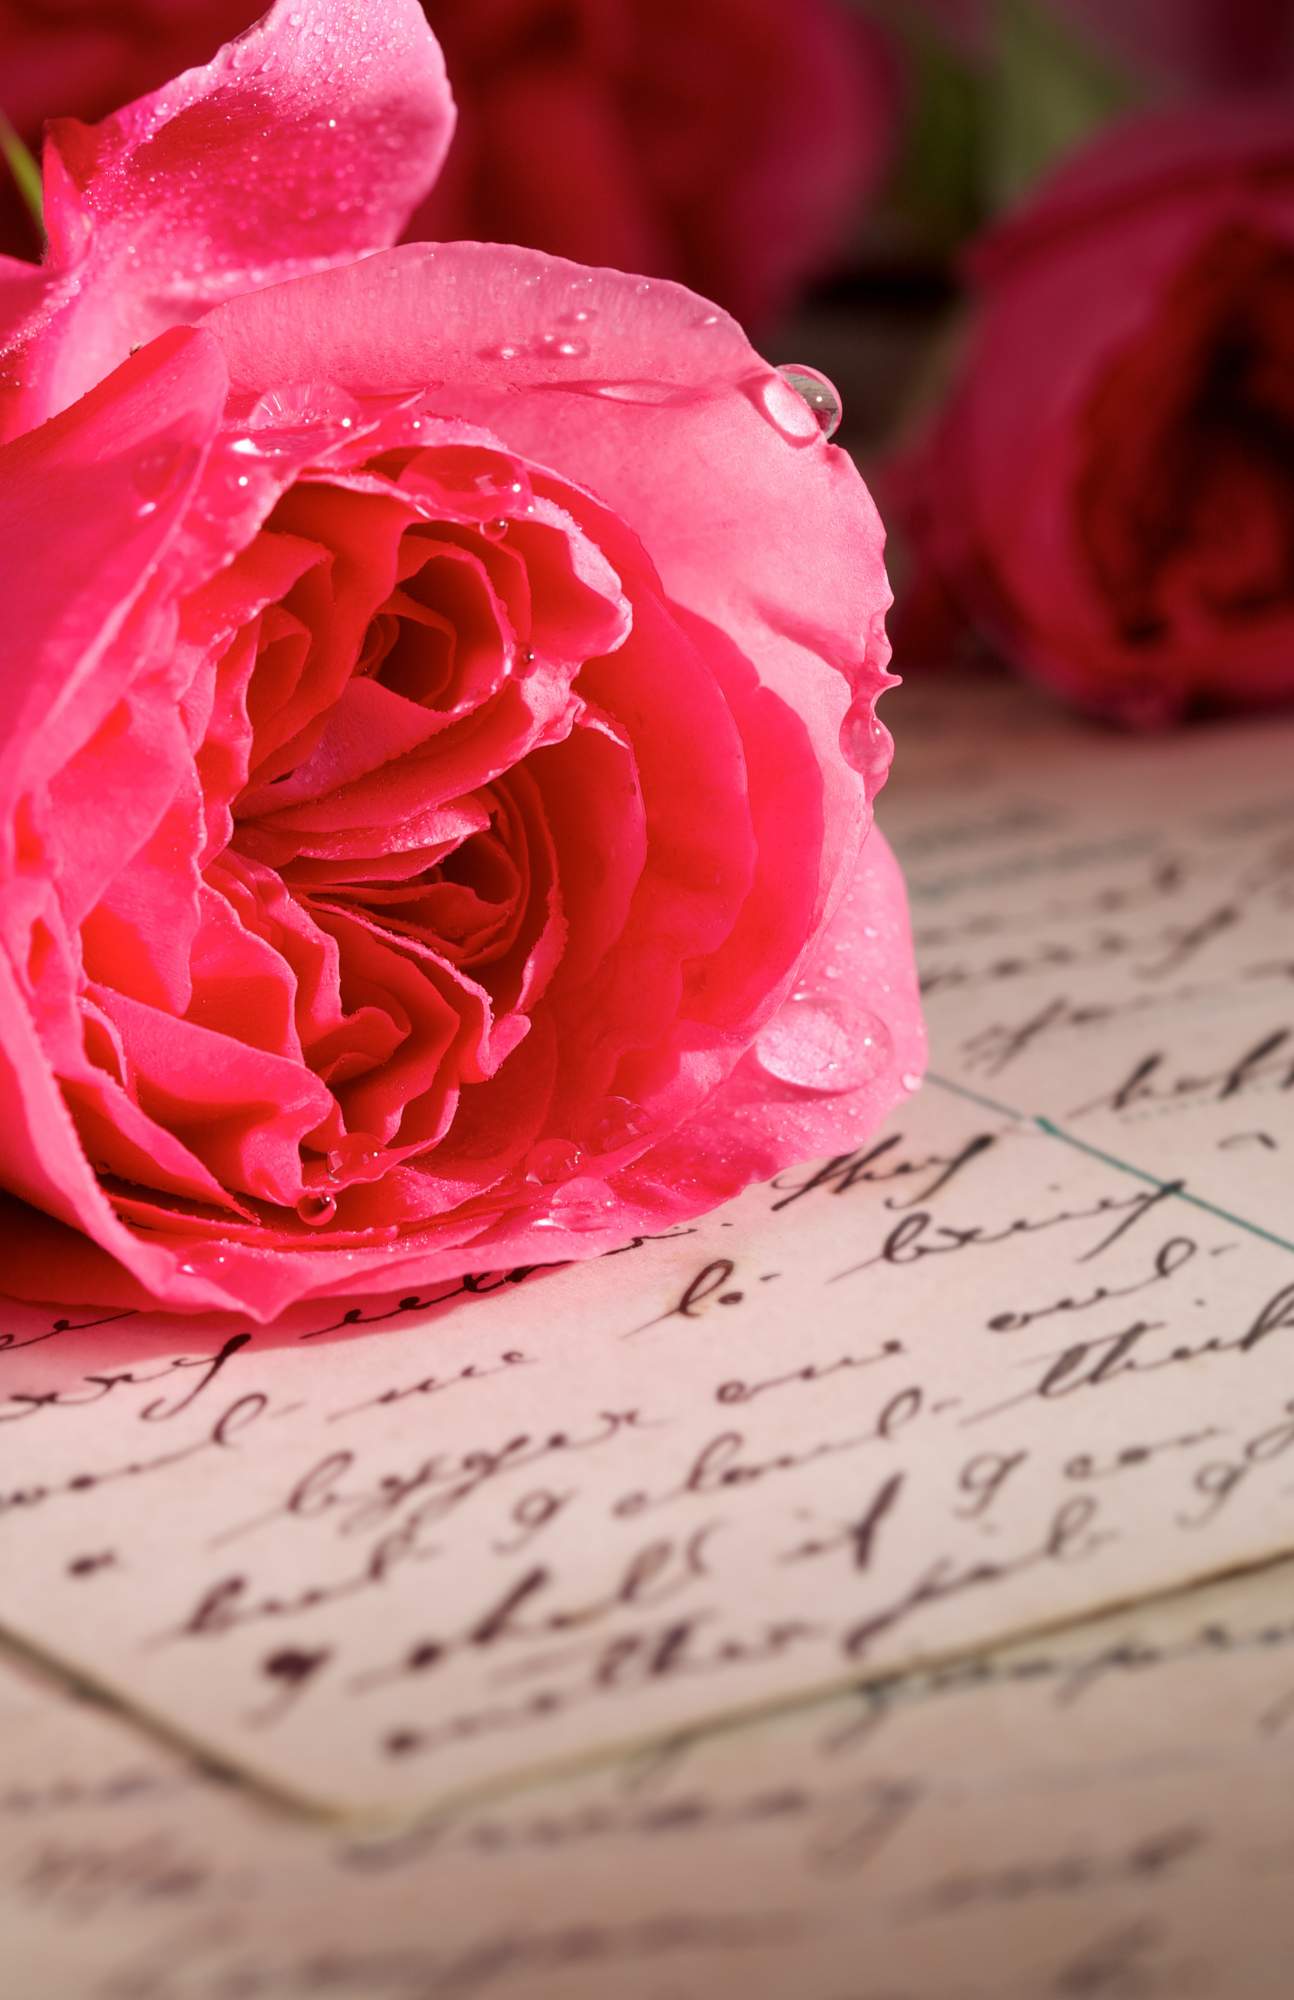 Love letter with a pink rose sitting on top.